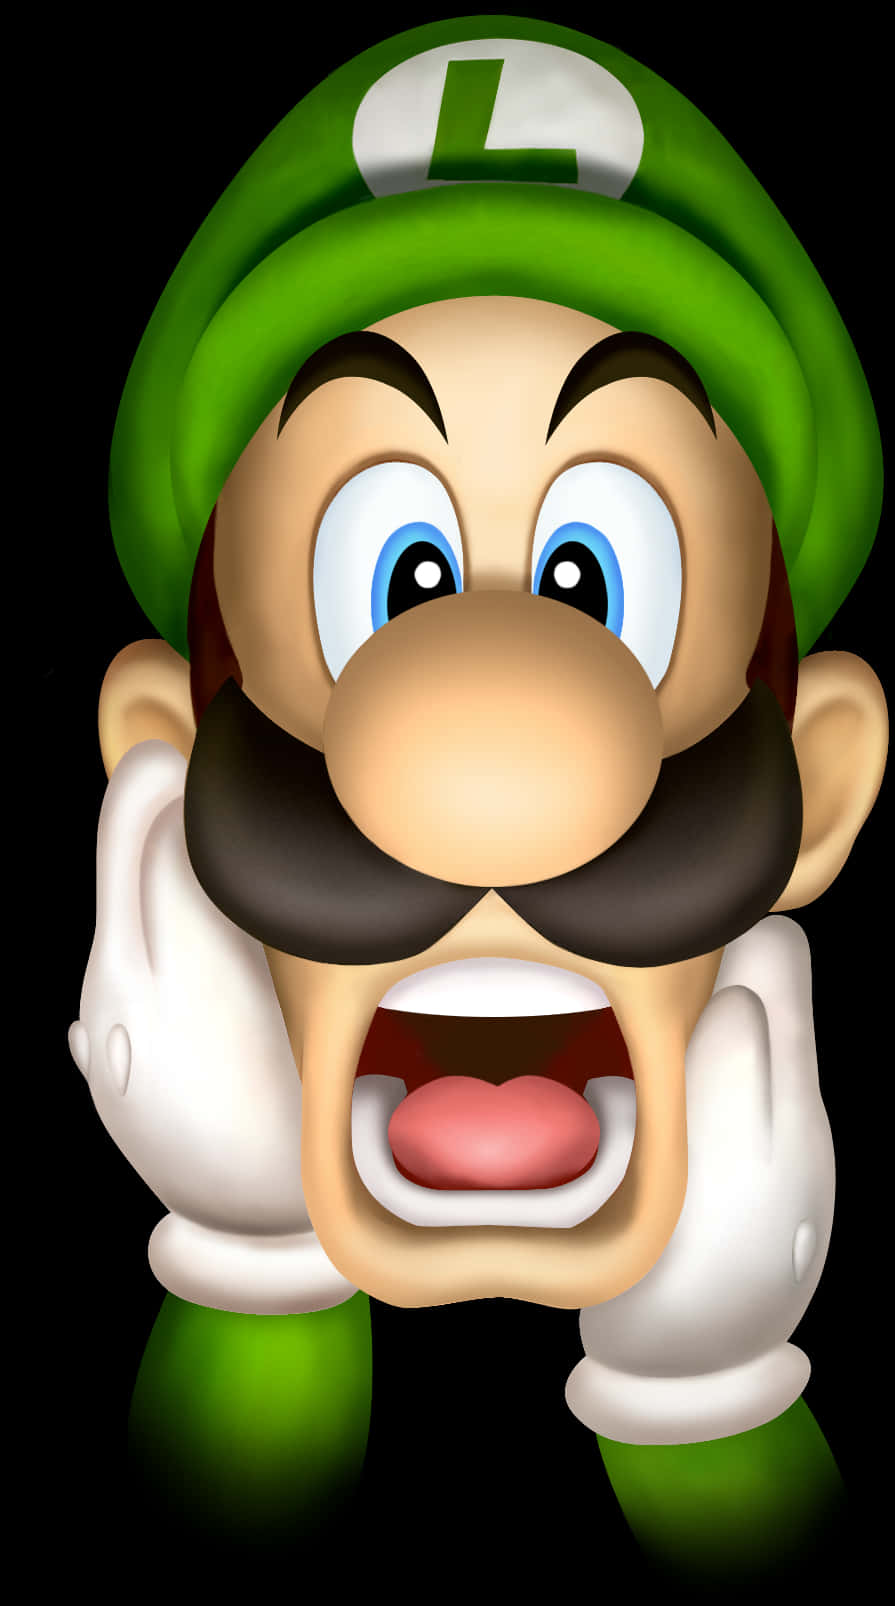 A Cartoon Of A Man With A Green Hat And Mustache PNG